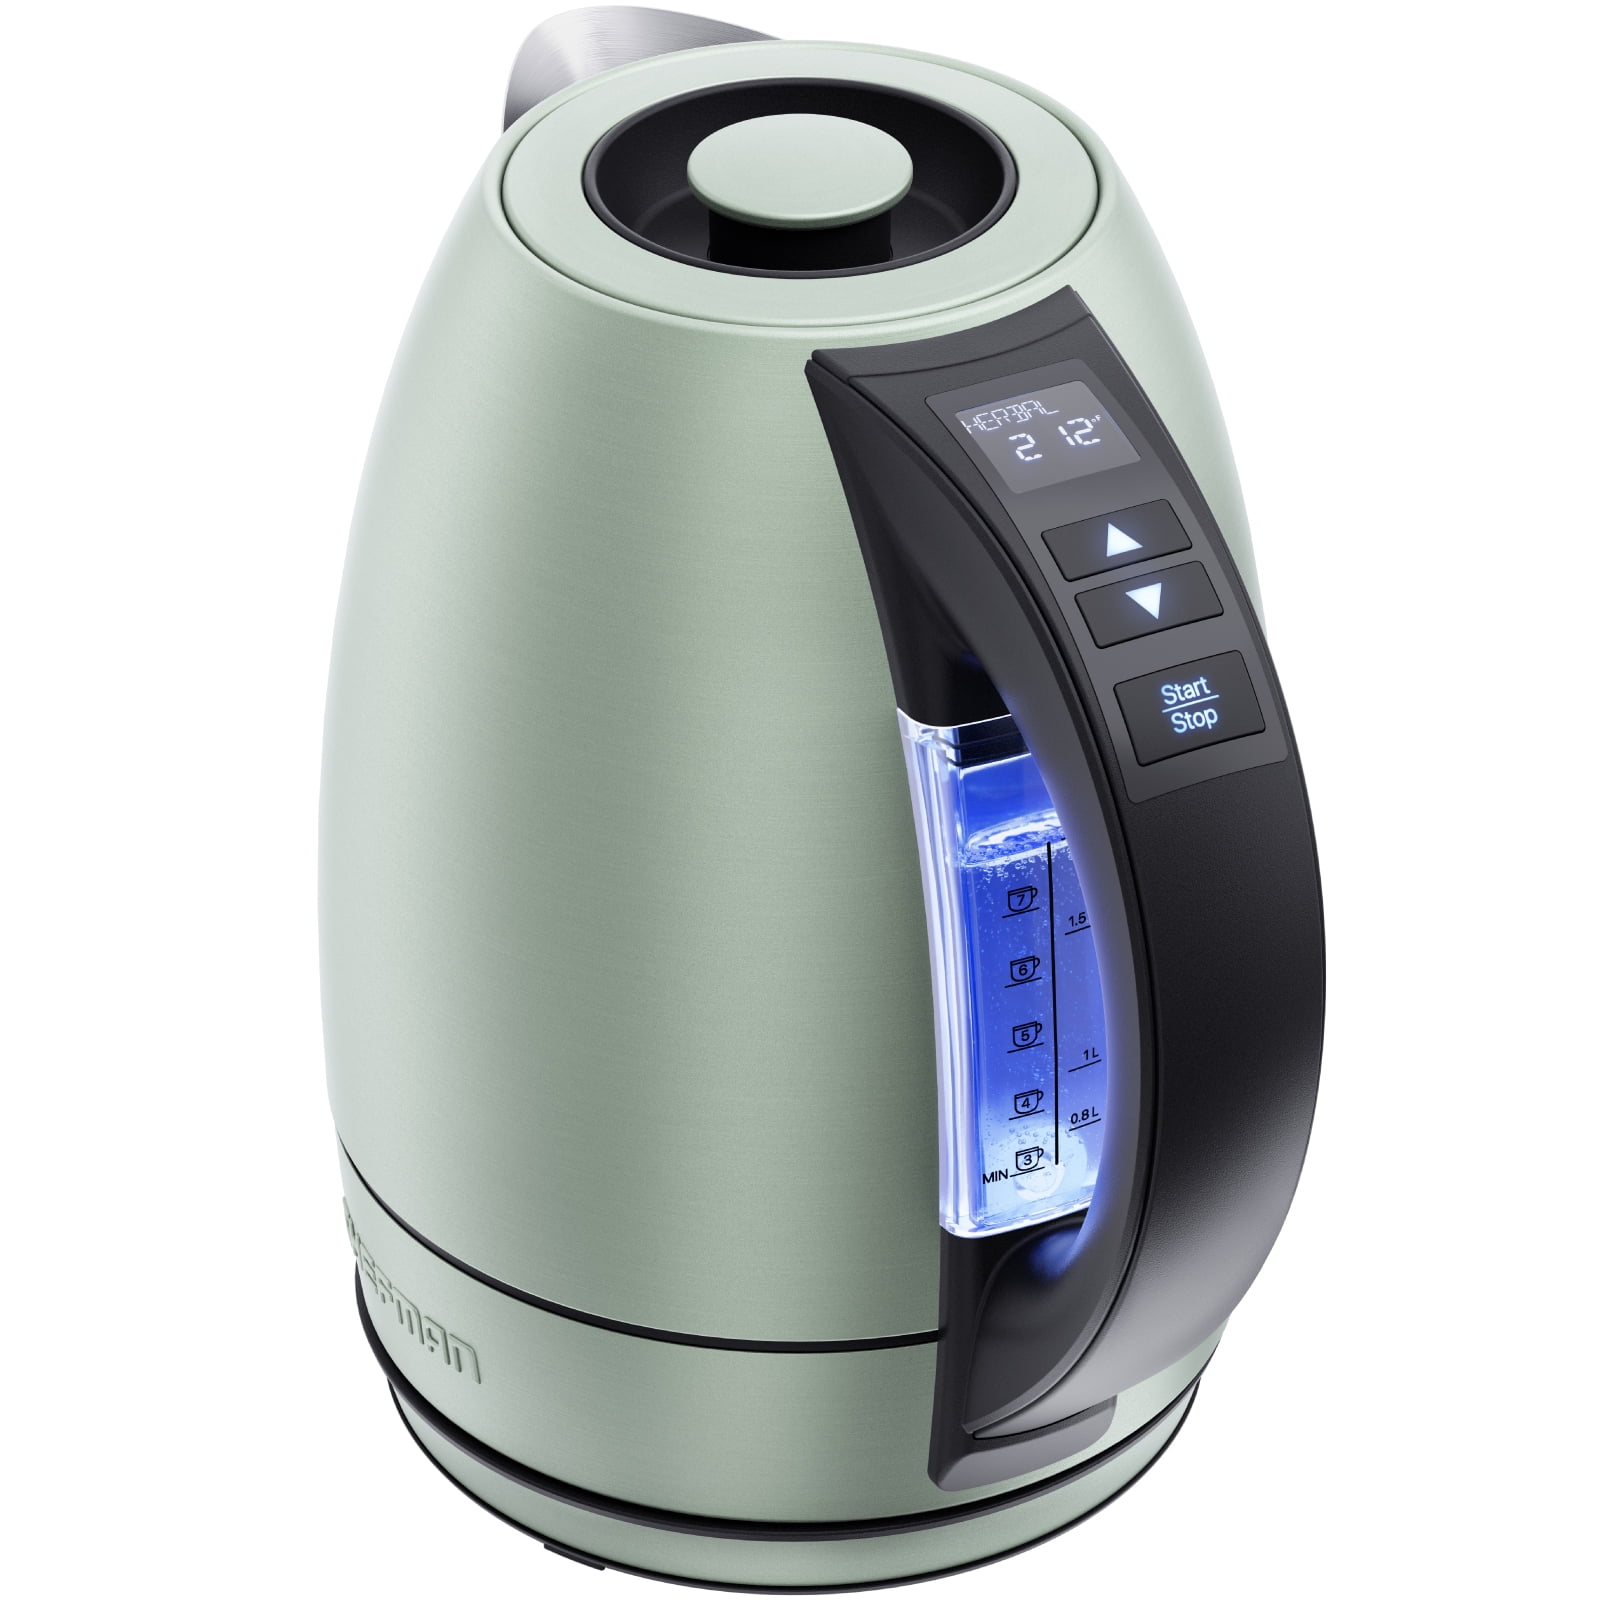 Beautiful 1.7L One-Touch Electric Kettle, Sage Green by Drew Barrymore